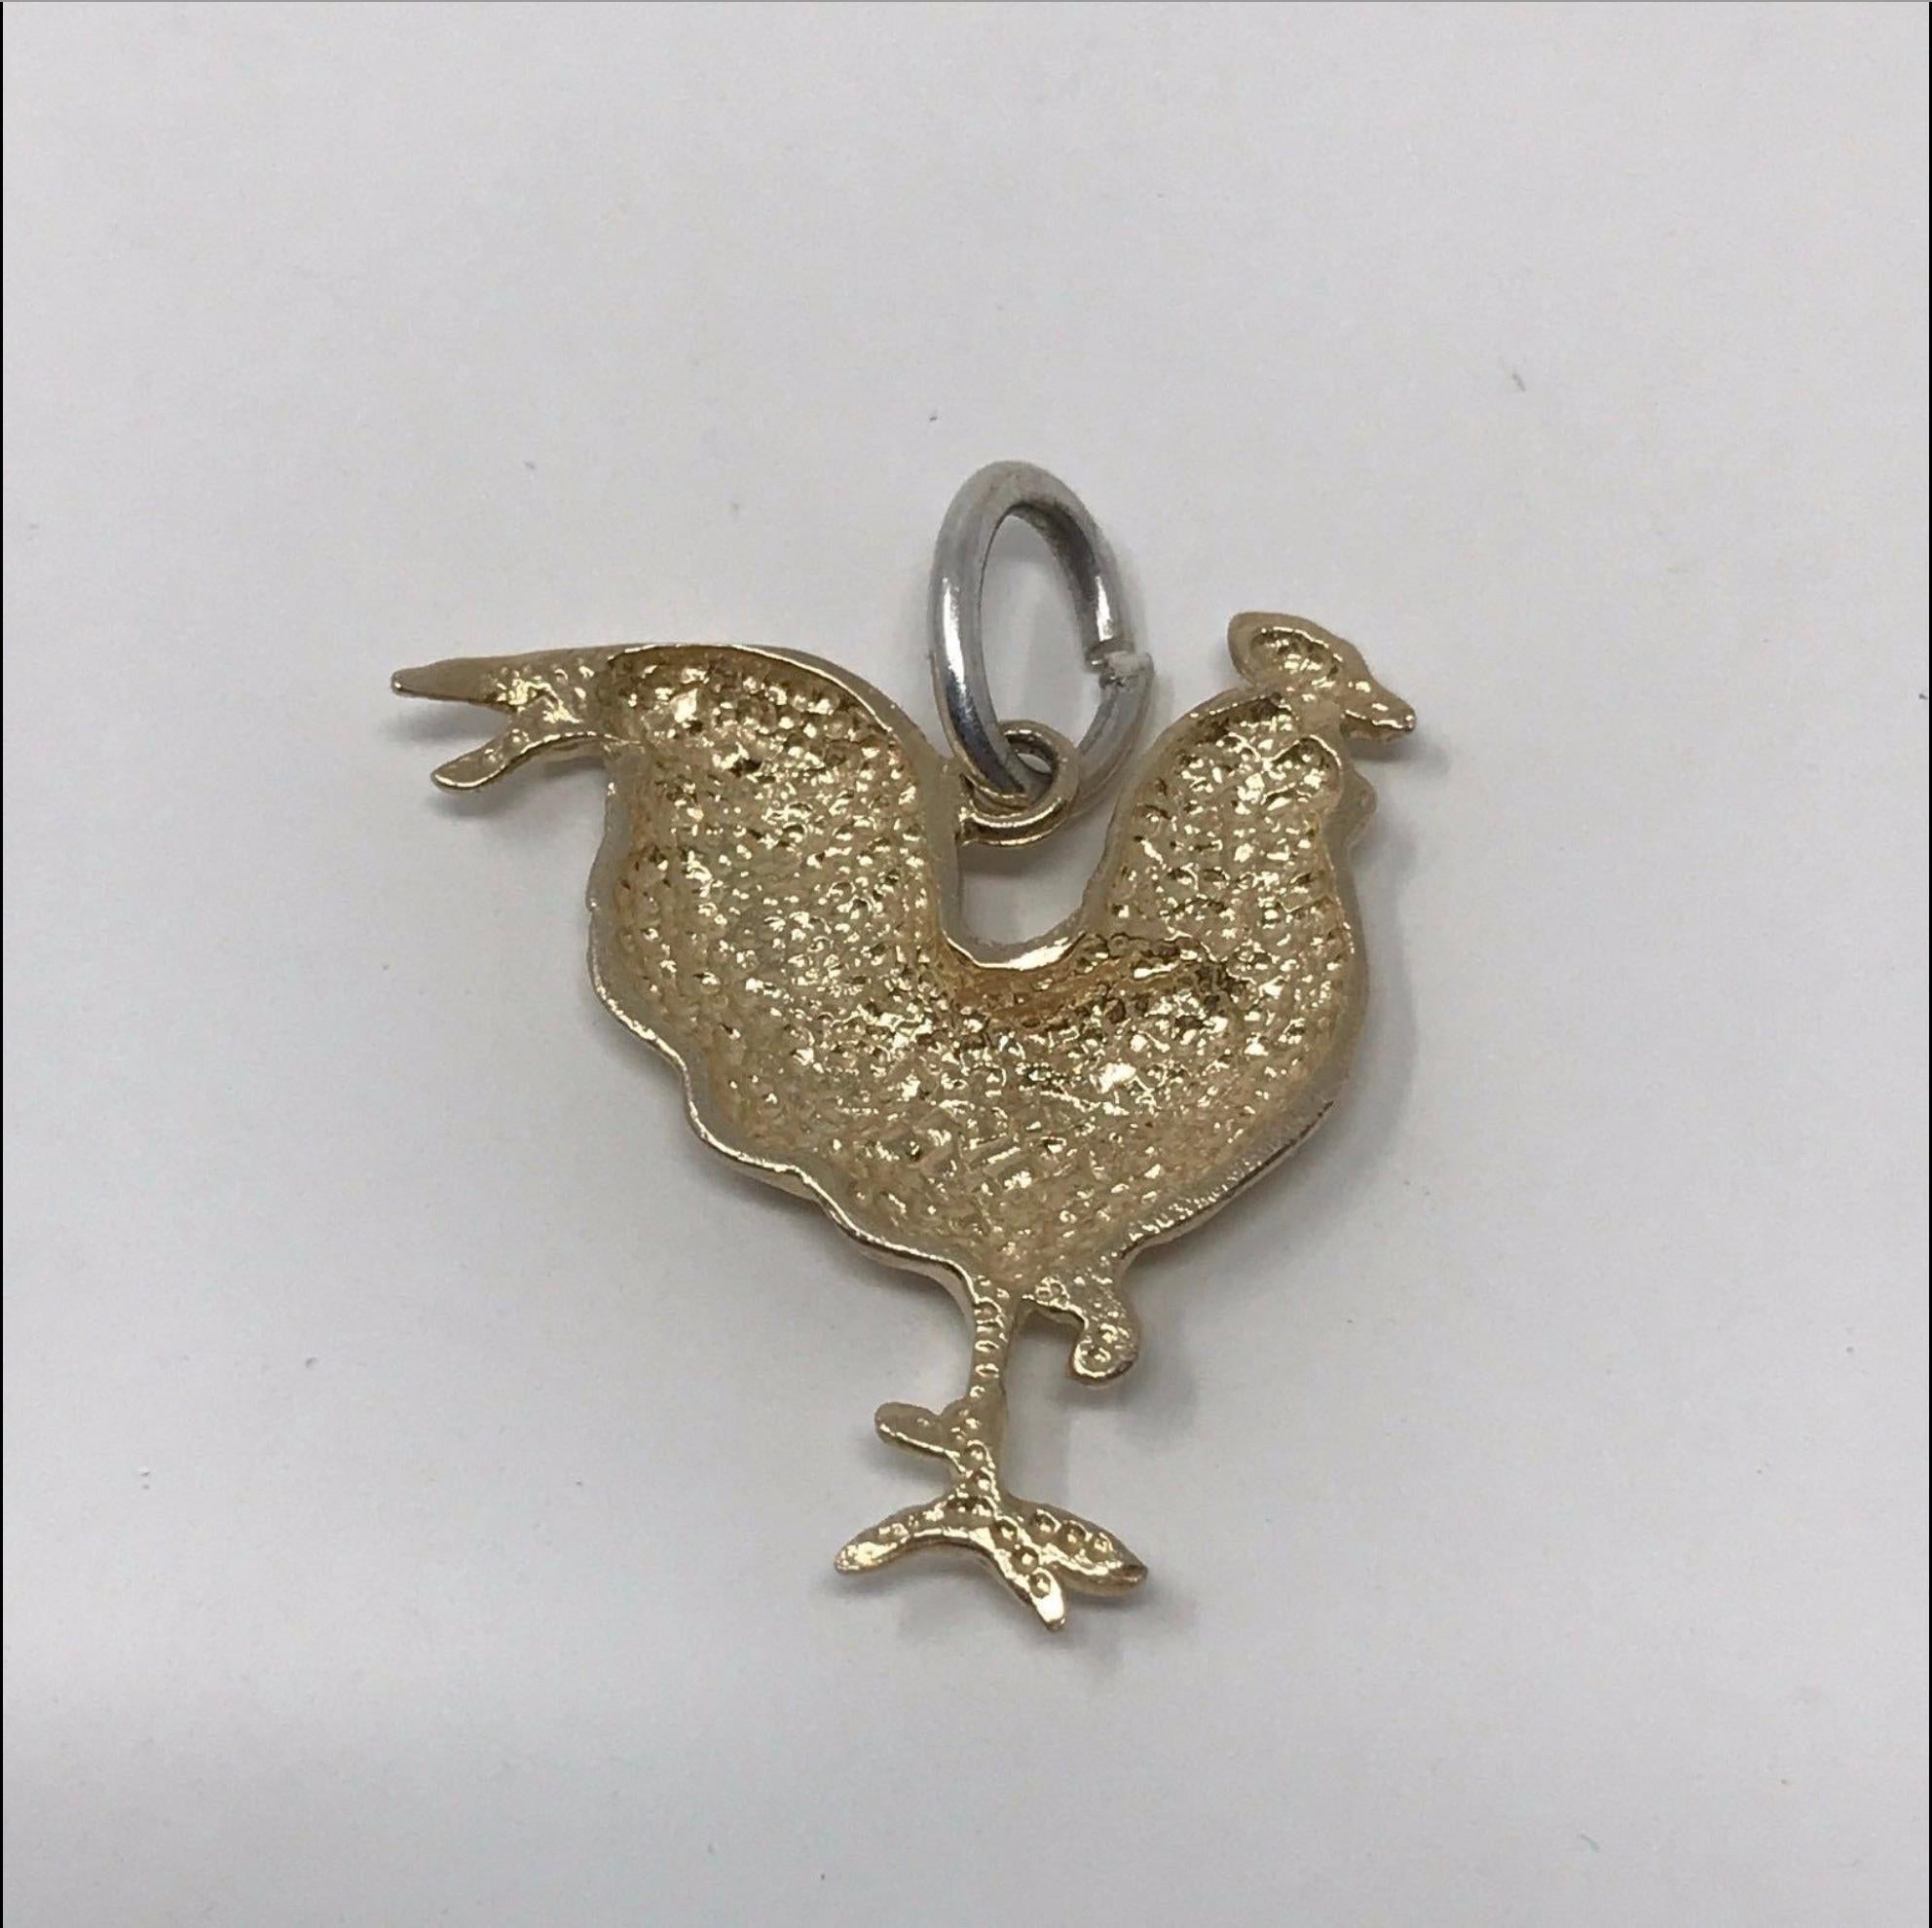 Model - Vintage 14k Gold Rooster Charm/Pendent

Condition - Exceptional

SKU - 1044-8

Original Retail - $480

Dimensions - 1.25 x 1 x .2

Closure Type - NA

Material - 14k Gold

Comes with - No additional accessories

Additional Information - Open